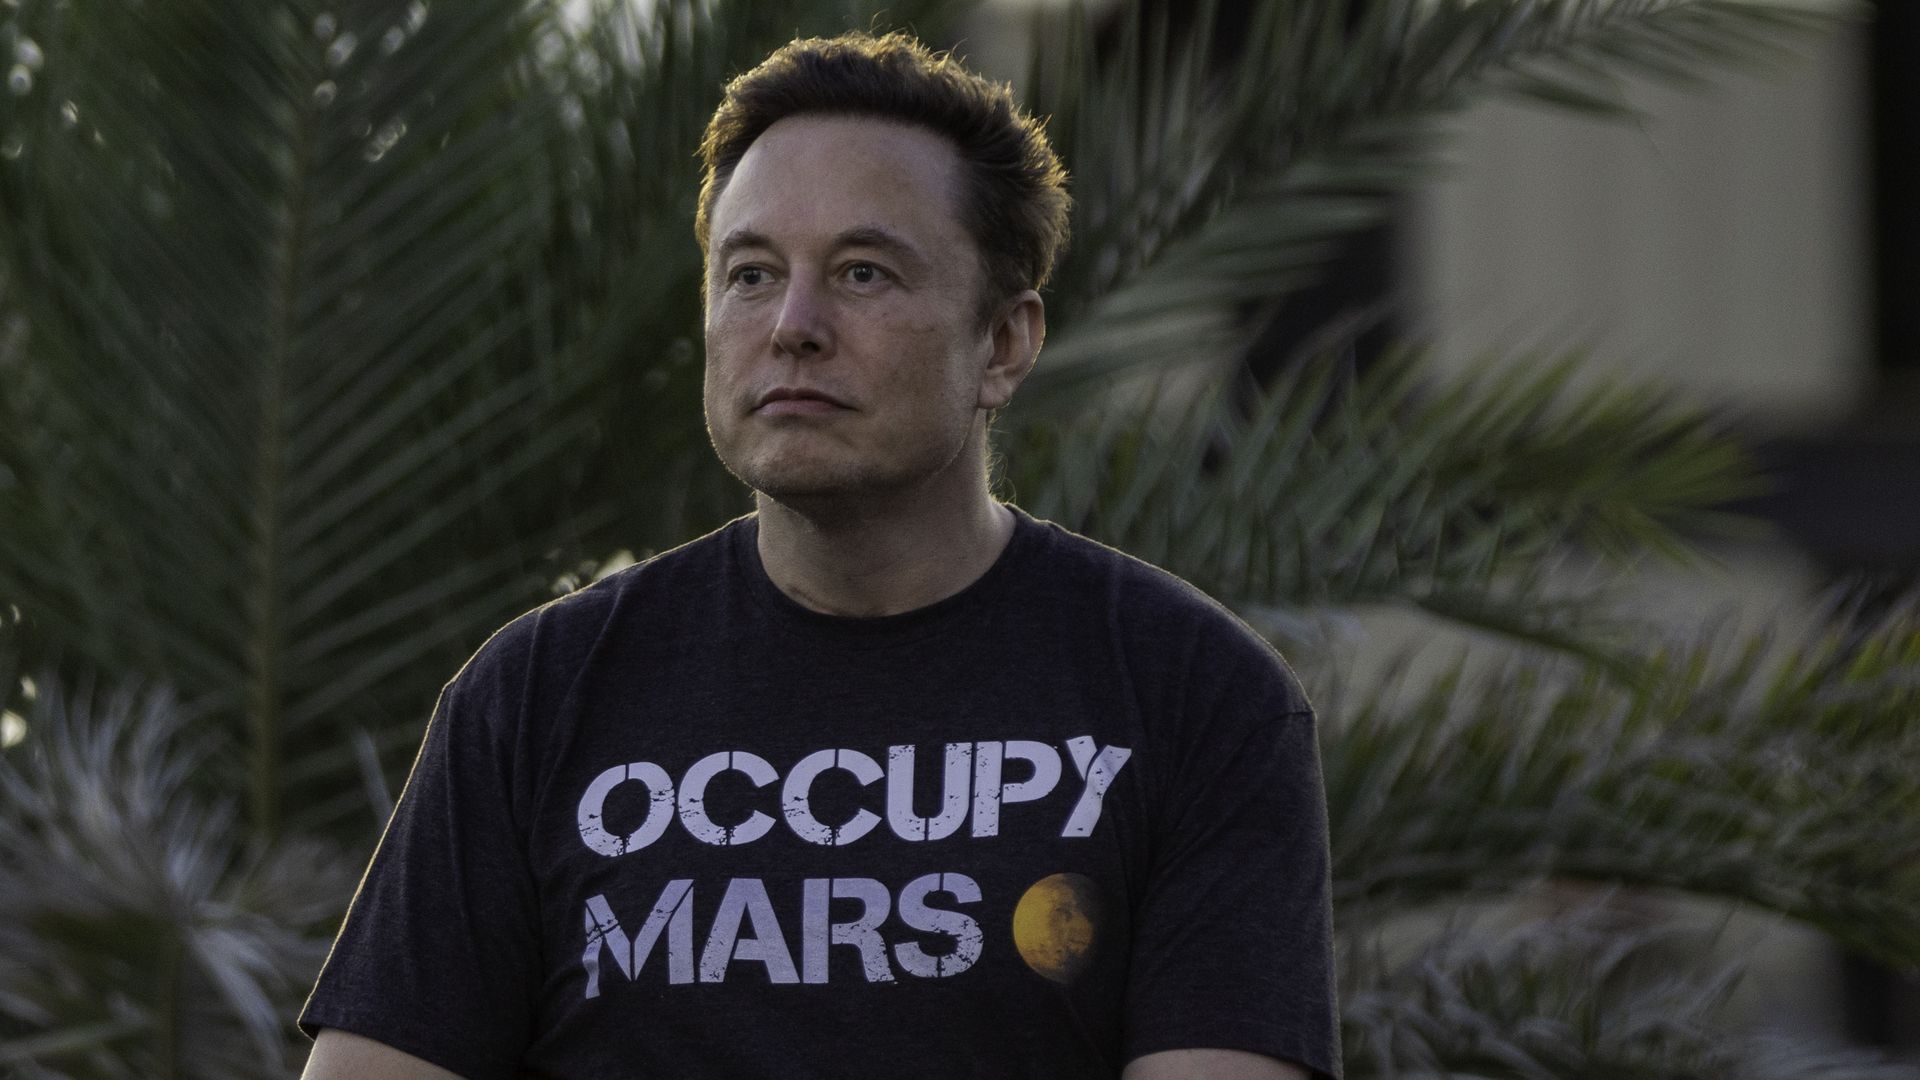 SpaceX founder Elon Musk during a T-Mobile and SpaceX joint event.